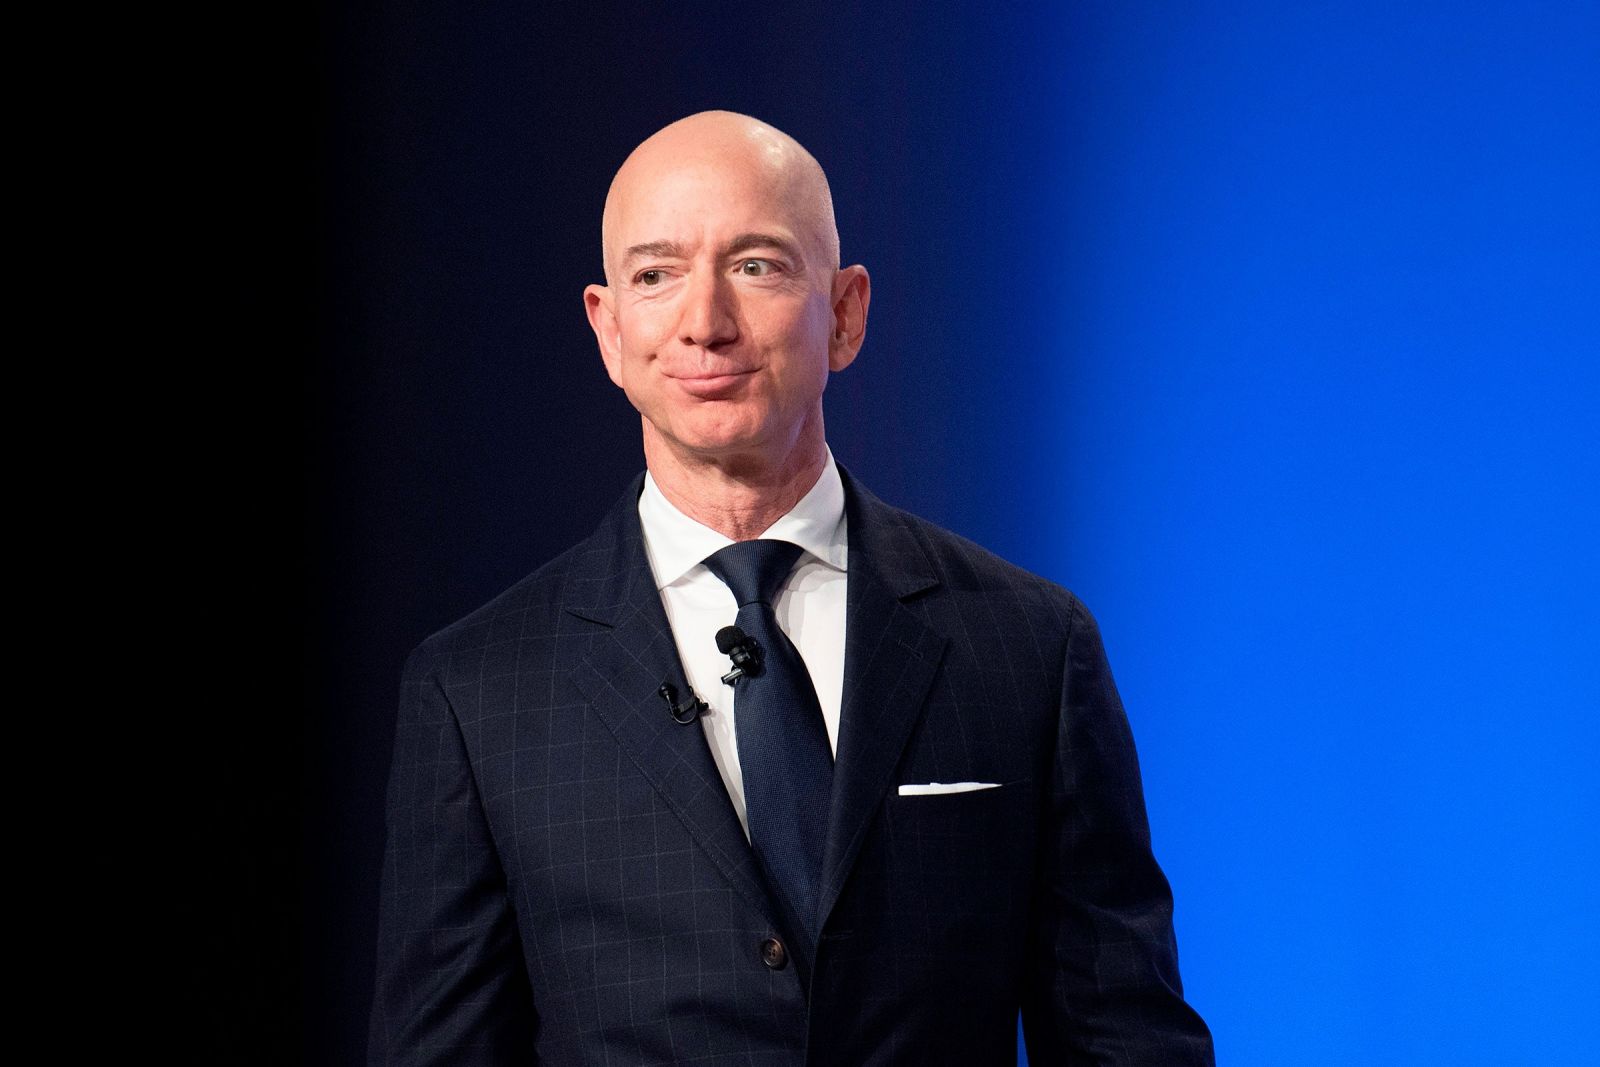 5 lessons from Jeff Bezos's greatest success in 27 years as Amazon CEO